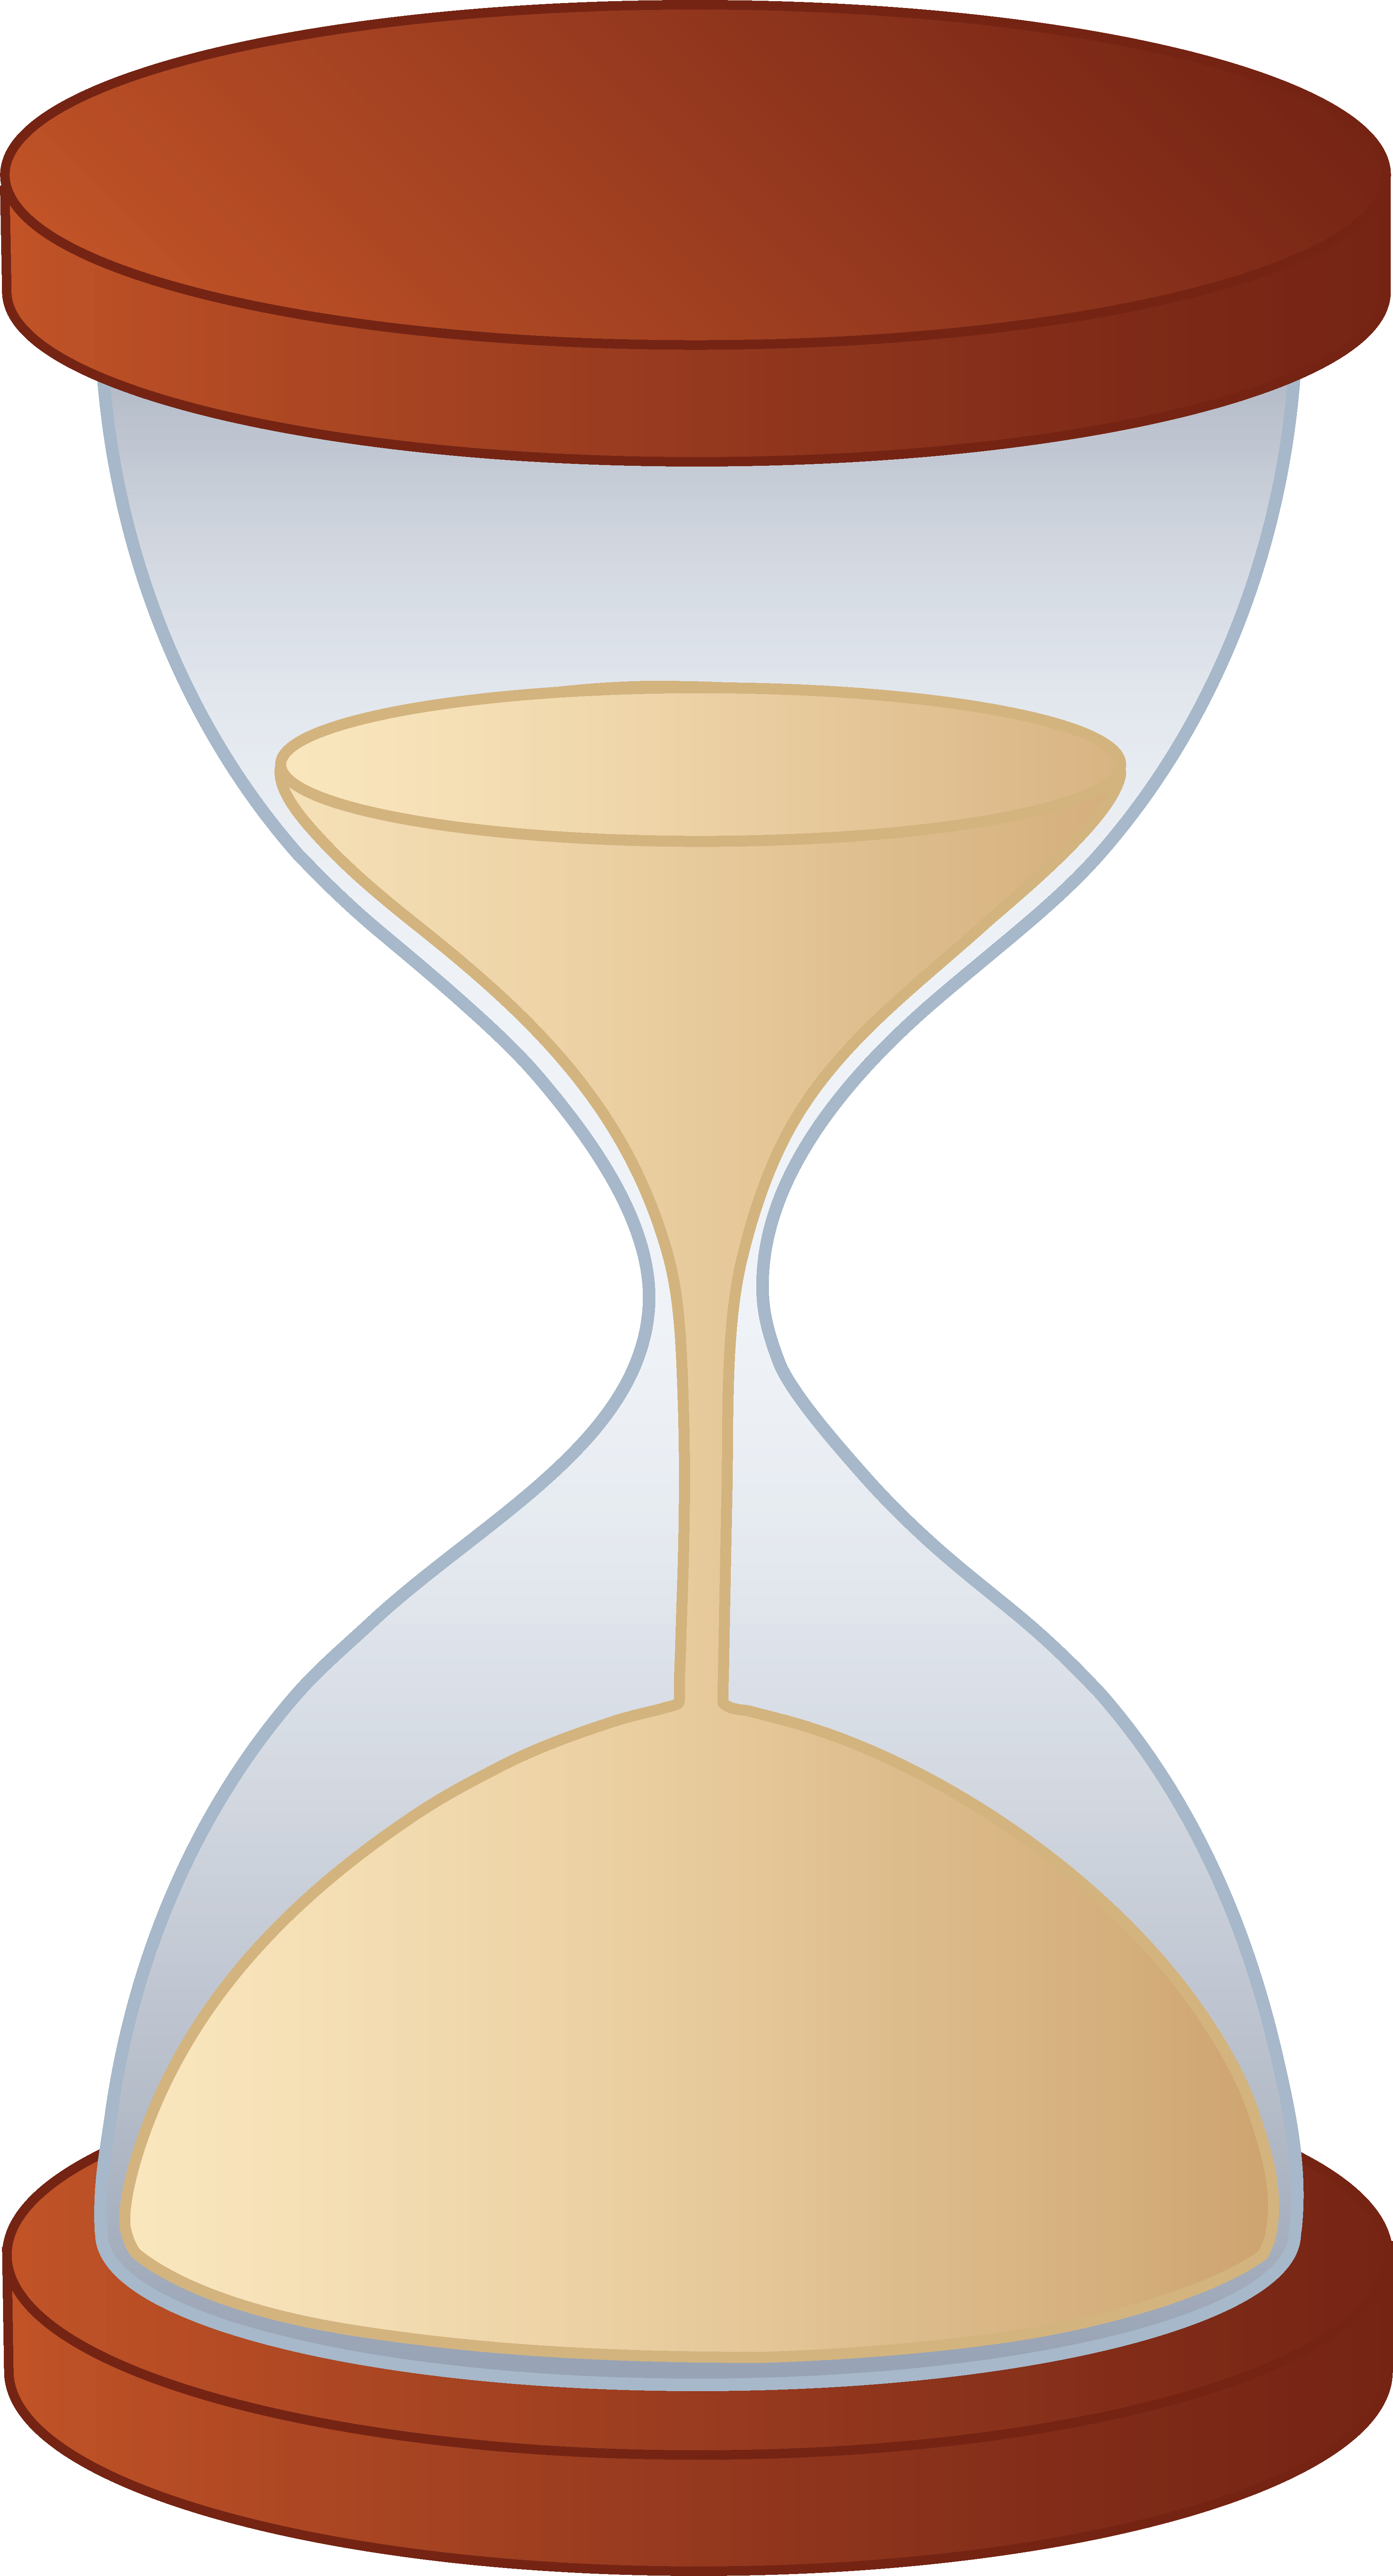 Hourglass Clipart PNG Image